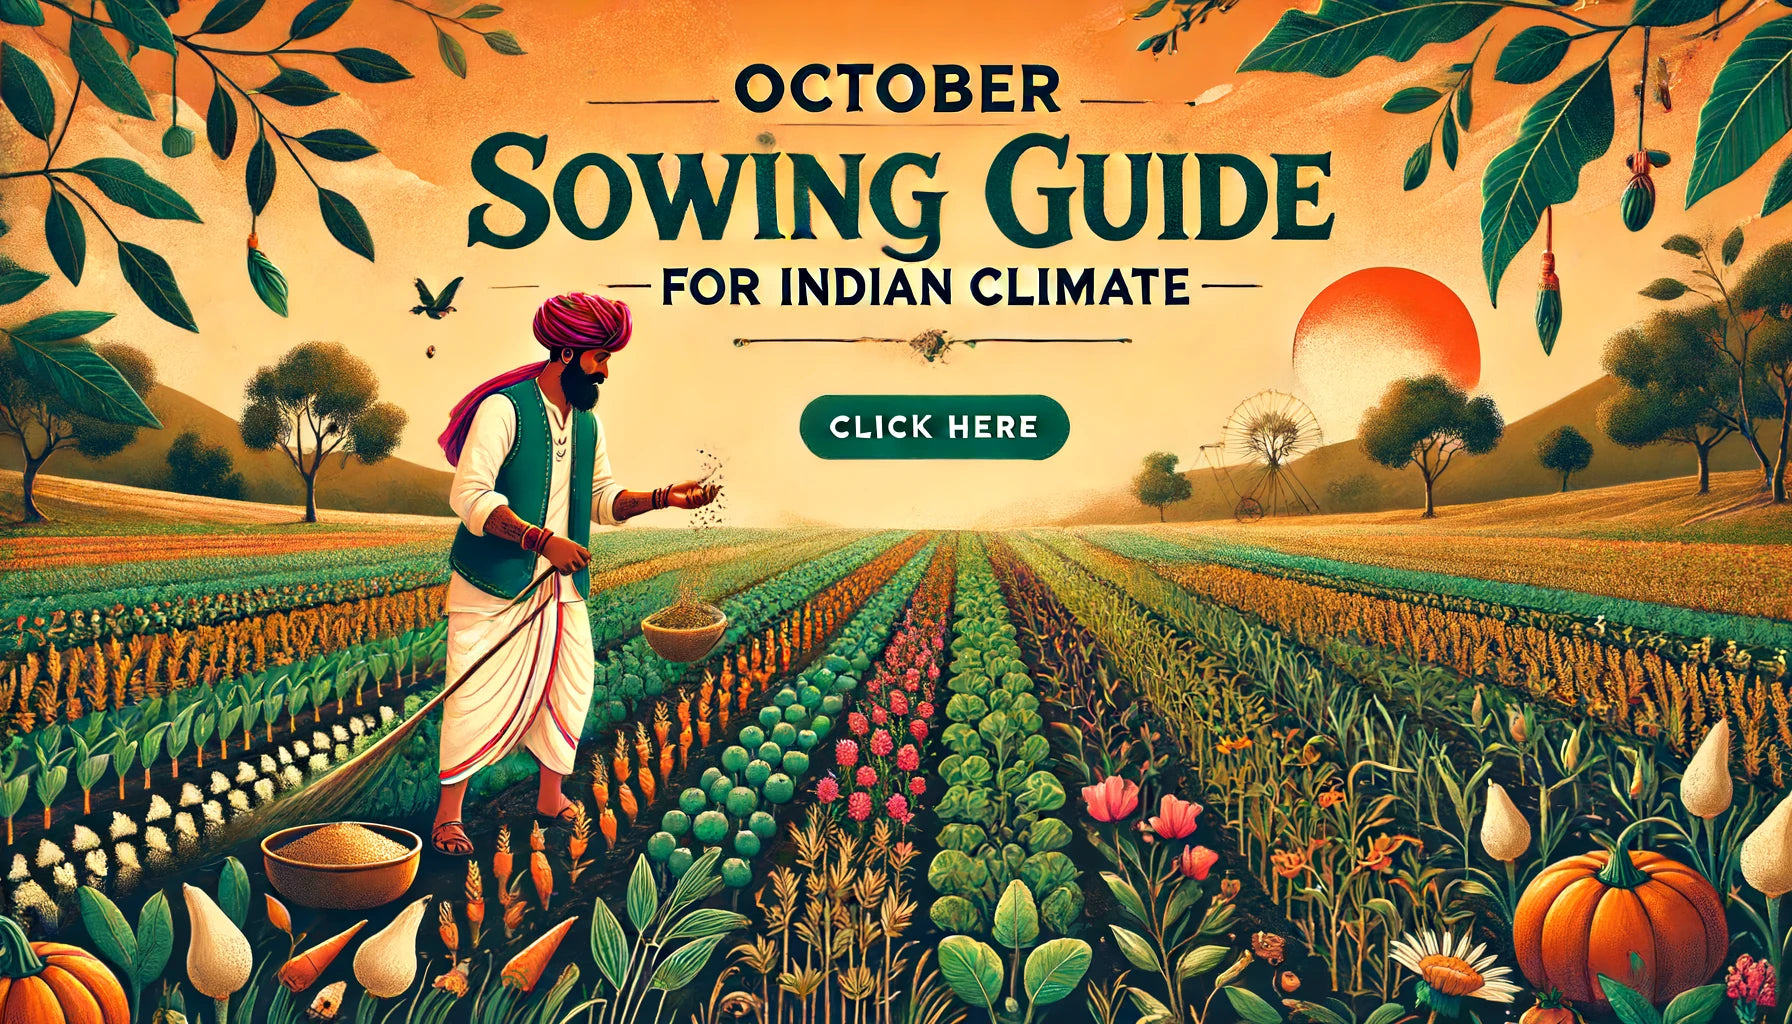 October Sowing Guide for Vegetables, Flowers, and Exotic Herbs in Indian Climate